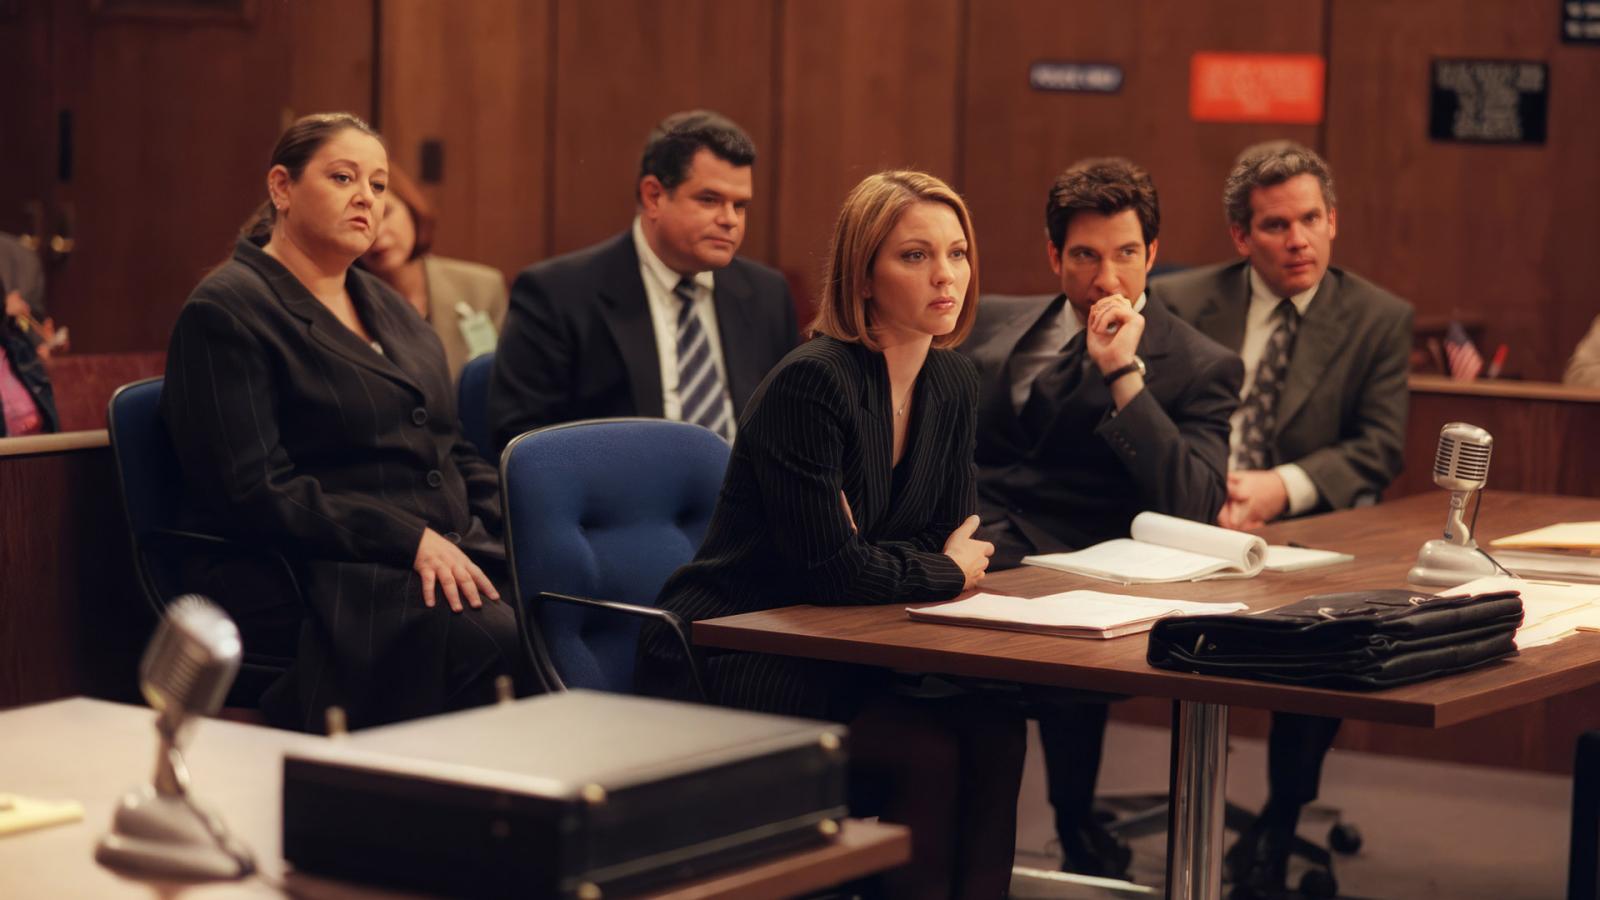 10 Shows For Law Students To Watch For Courtroom Drama - image 5